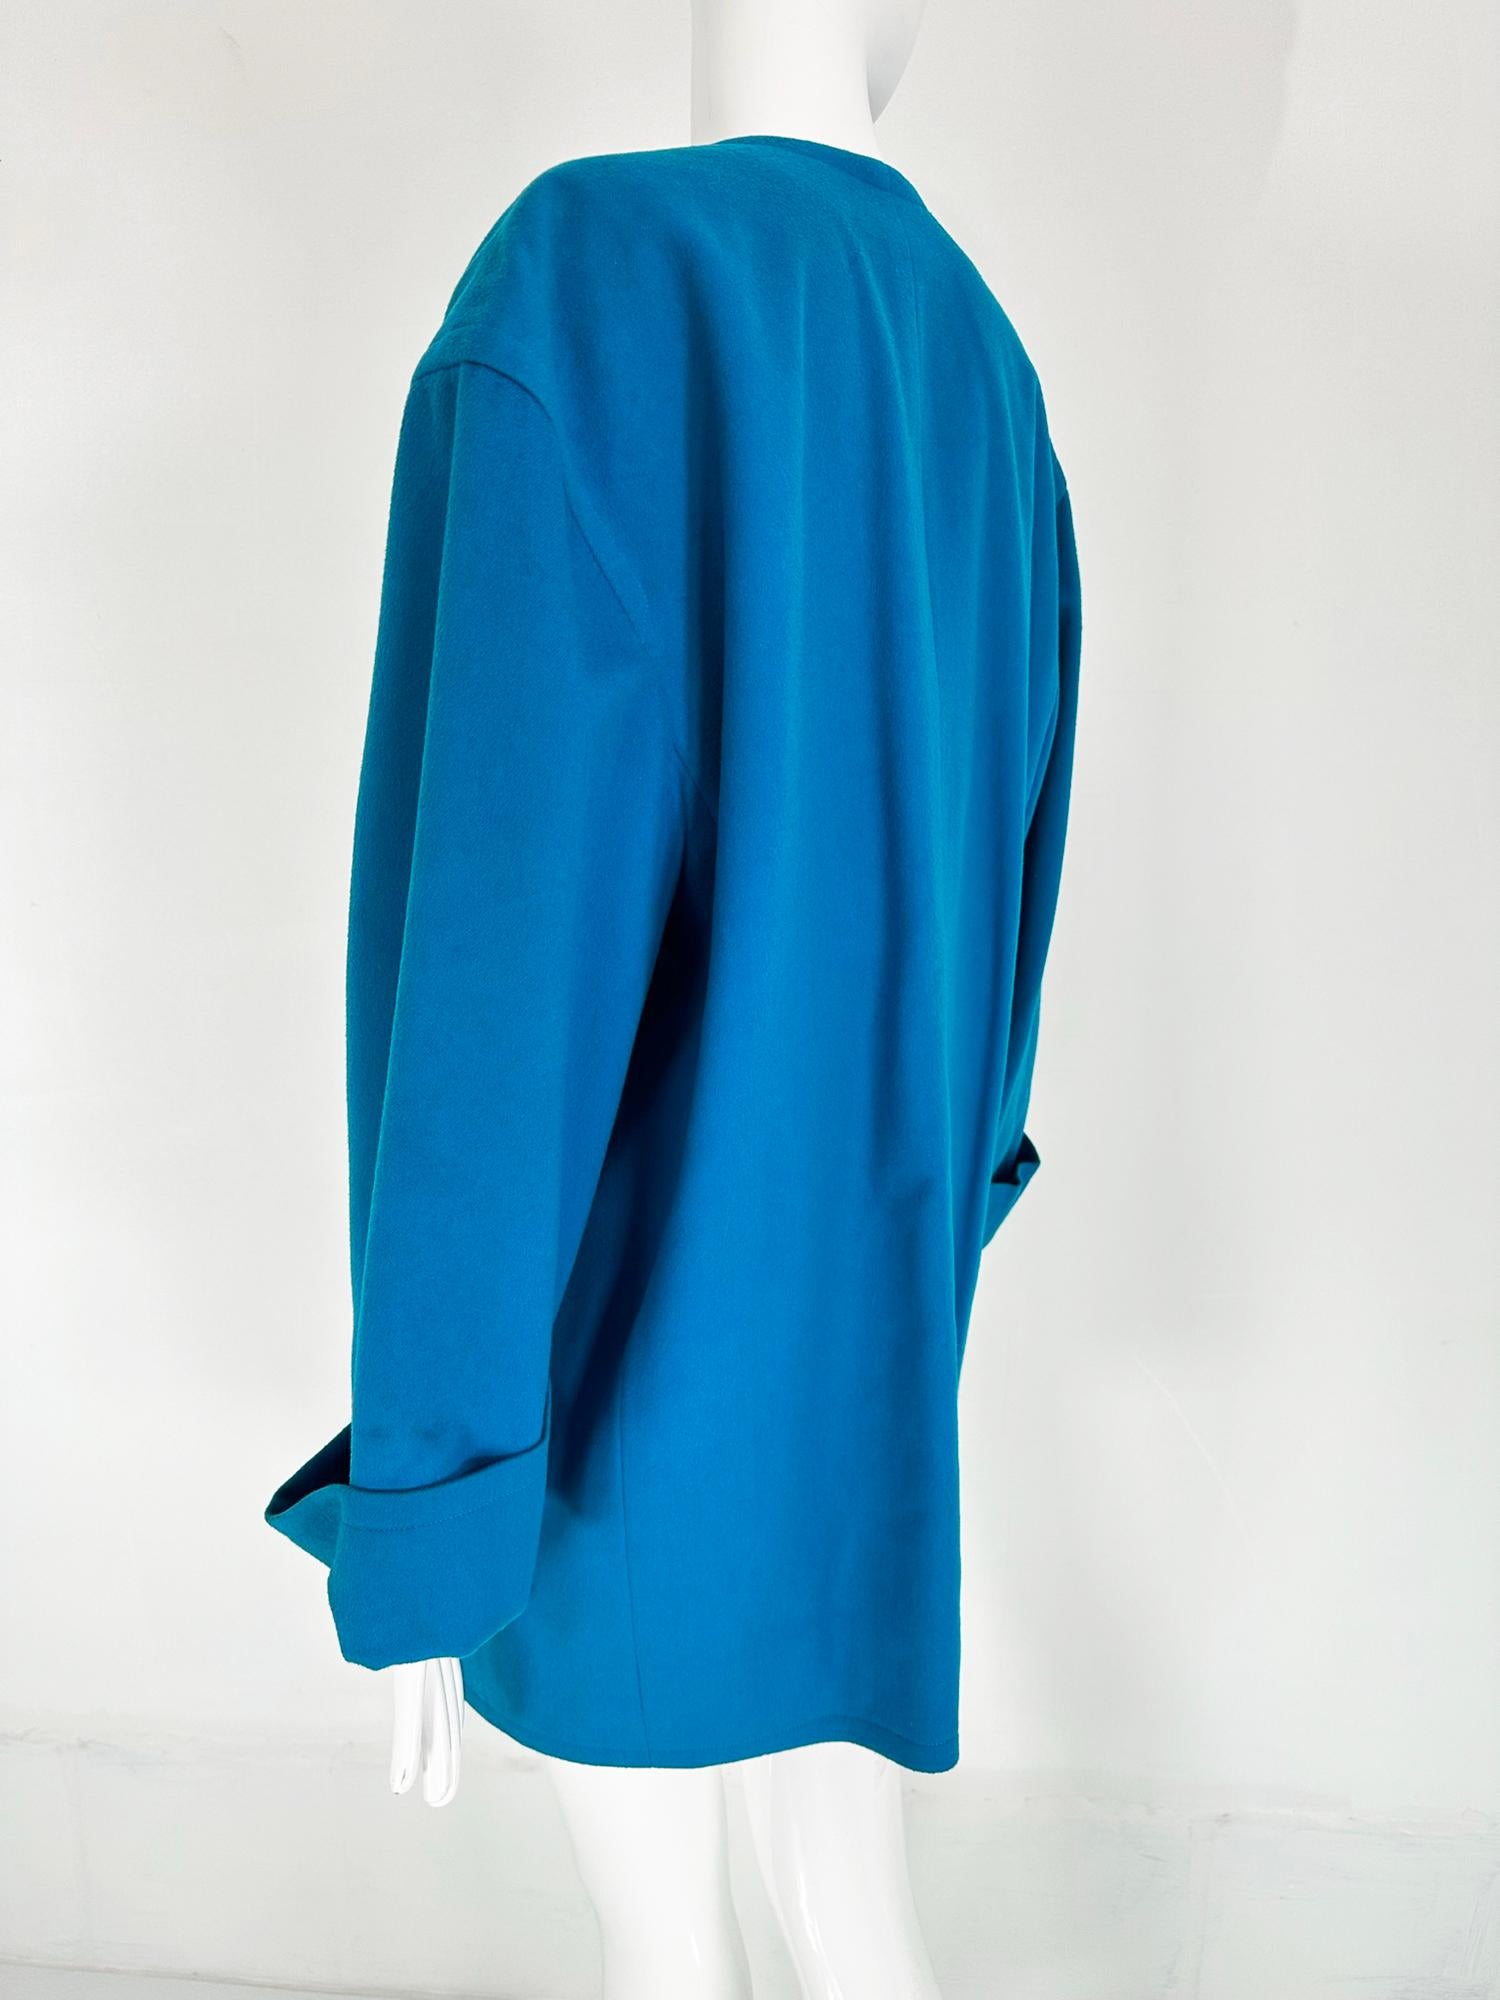 Givenchy Turquoise Wool Open Front Swing Coat with Angled Pockets 1980s For Sale 1